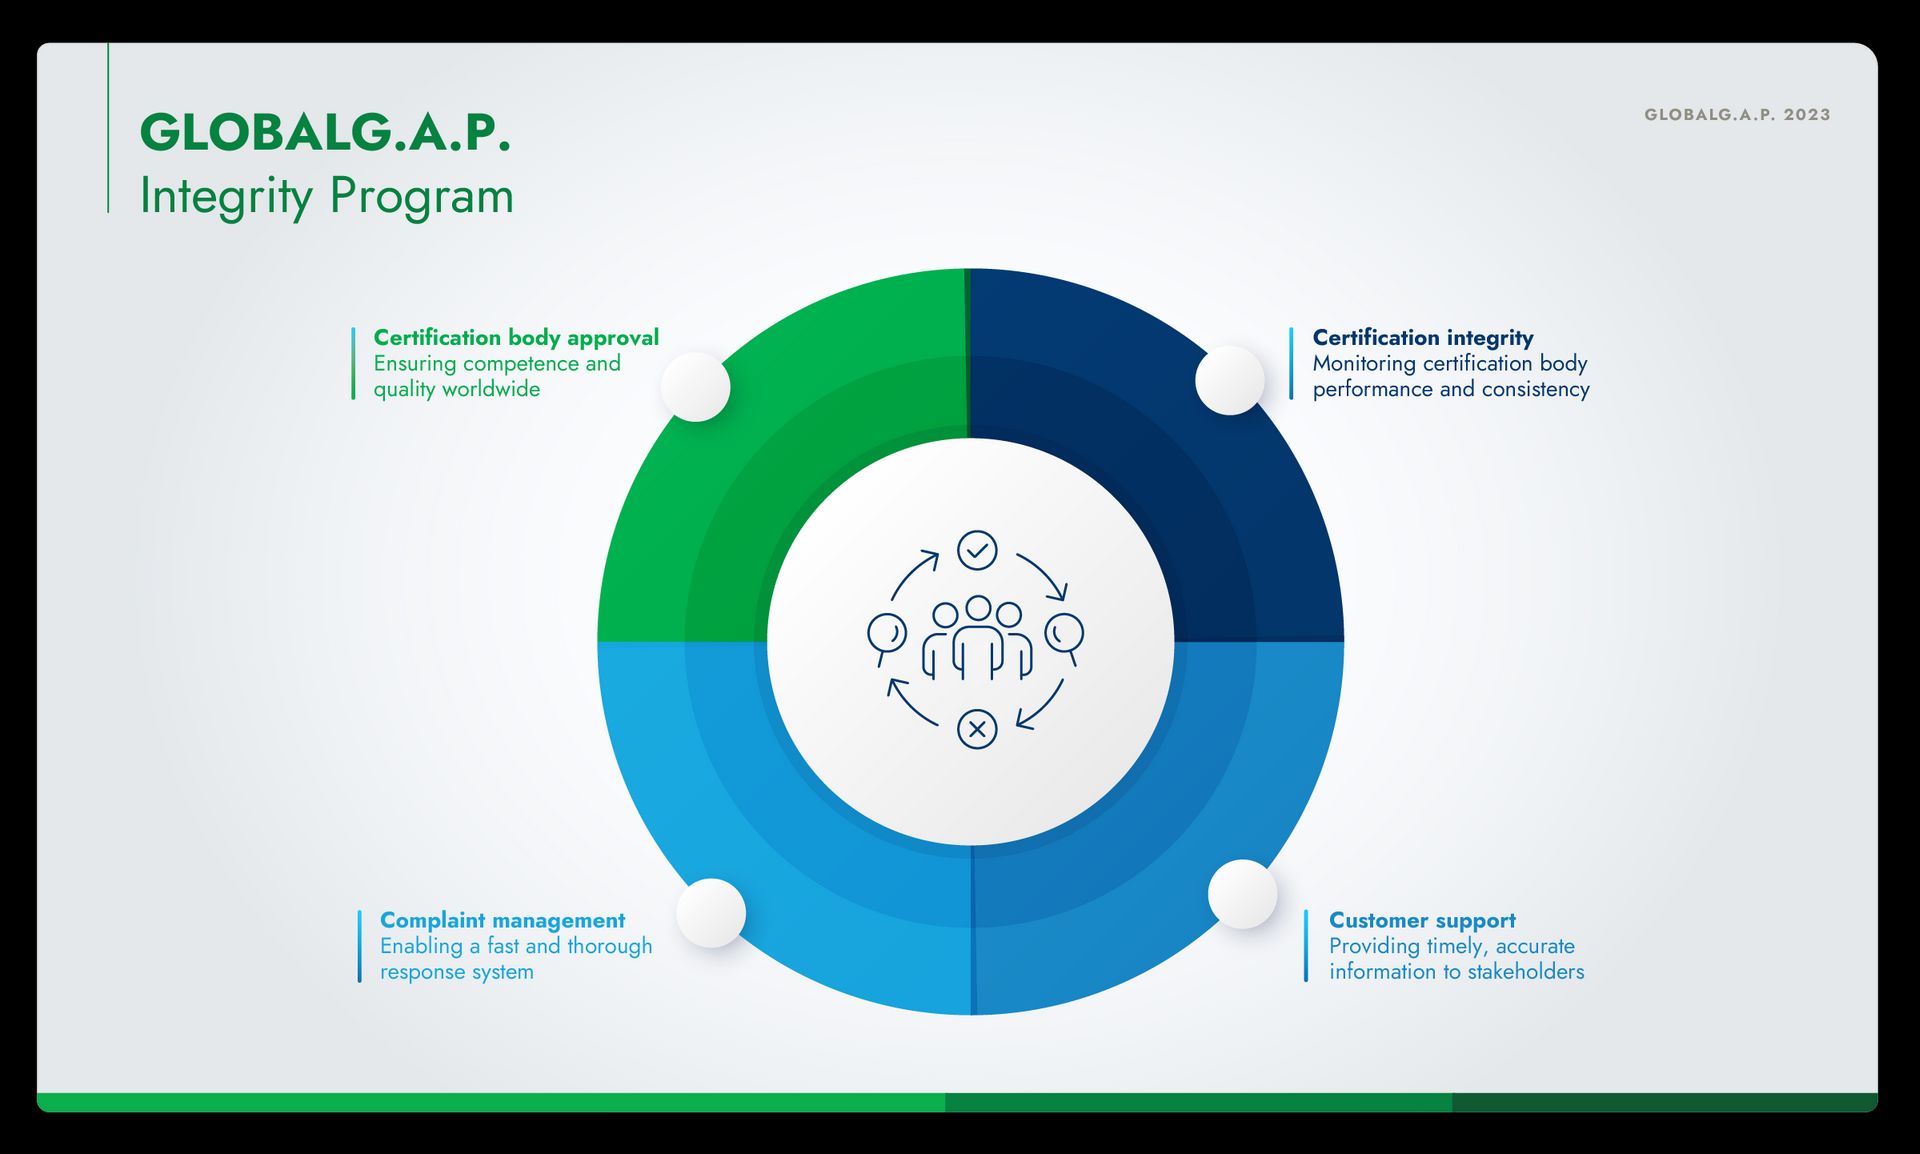 Infographic of the GLOBALG.A.P. Integrity Program activities